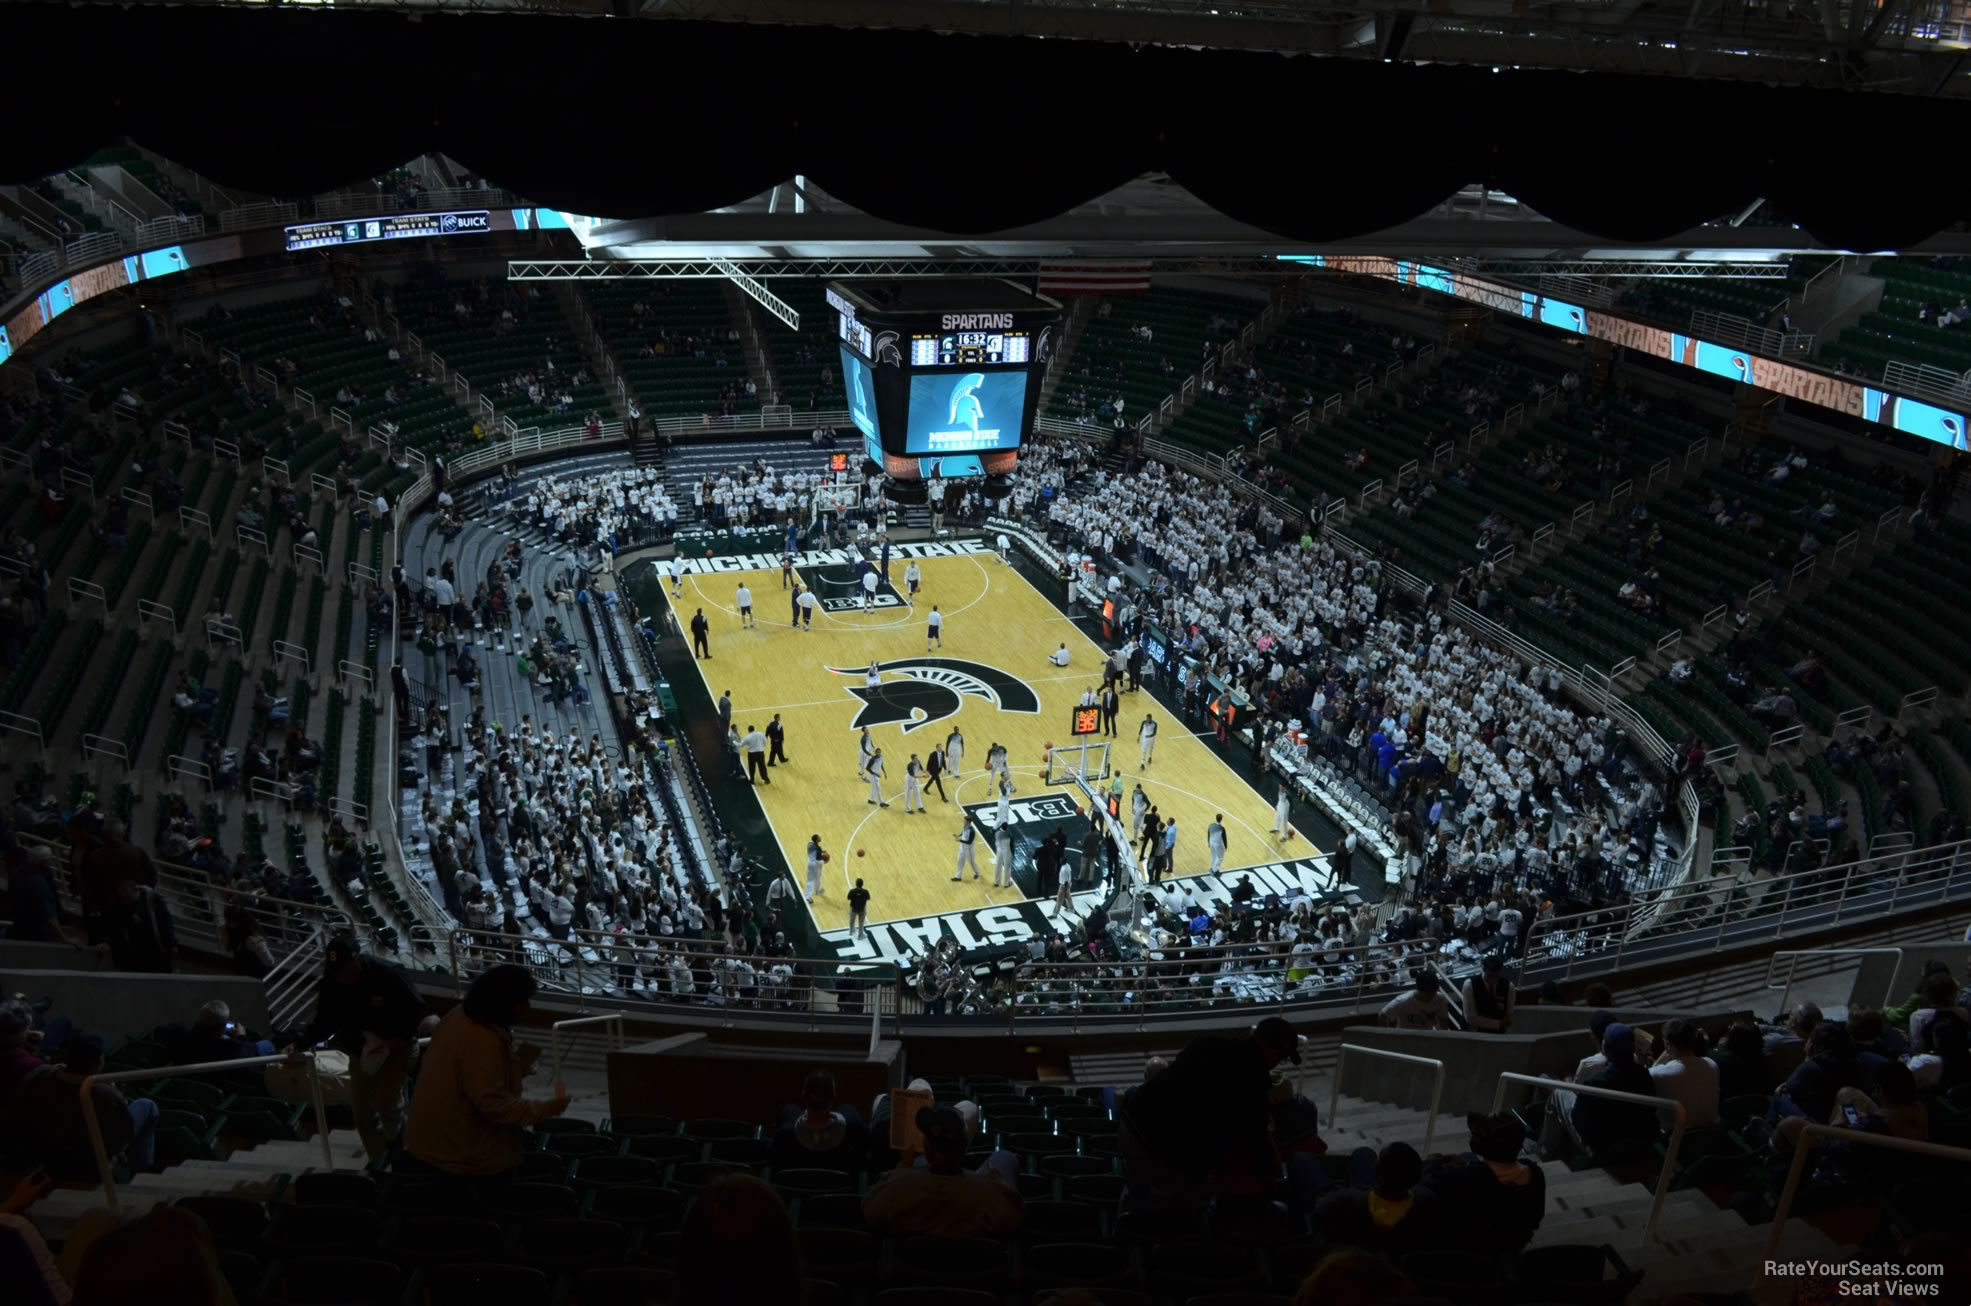 section 220, row 15 seat view  - breslin center